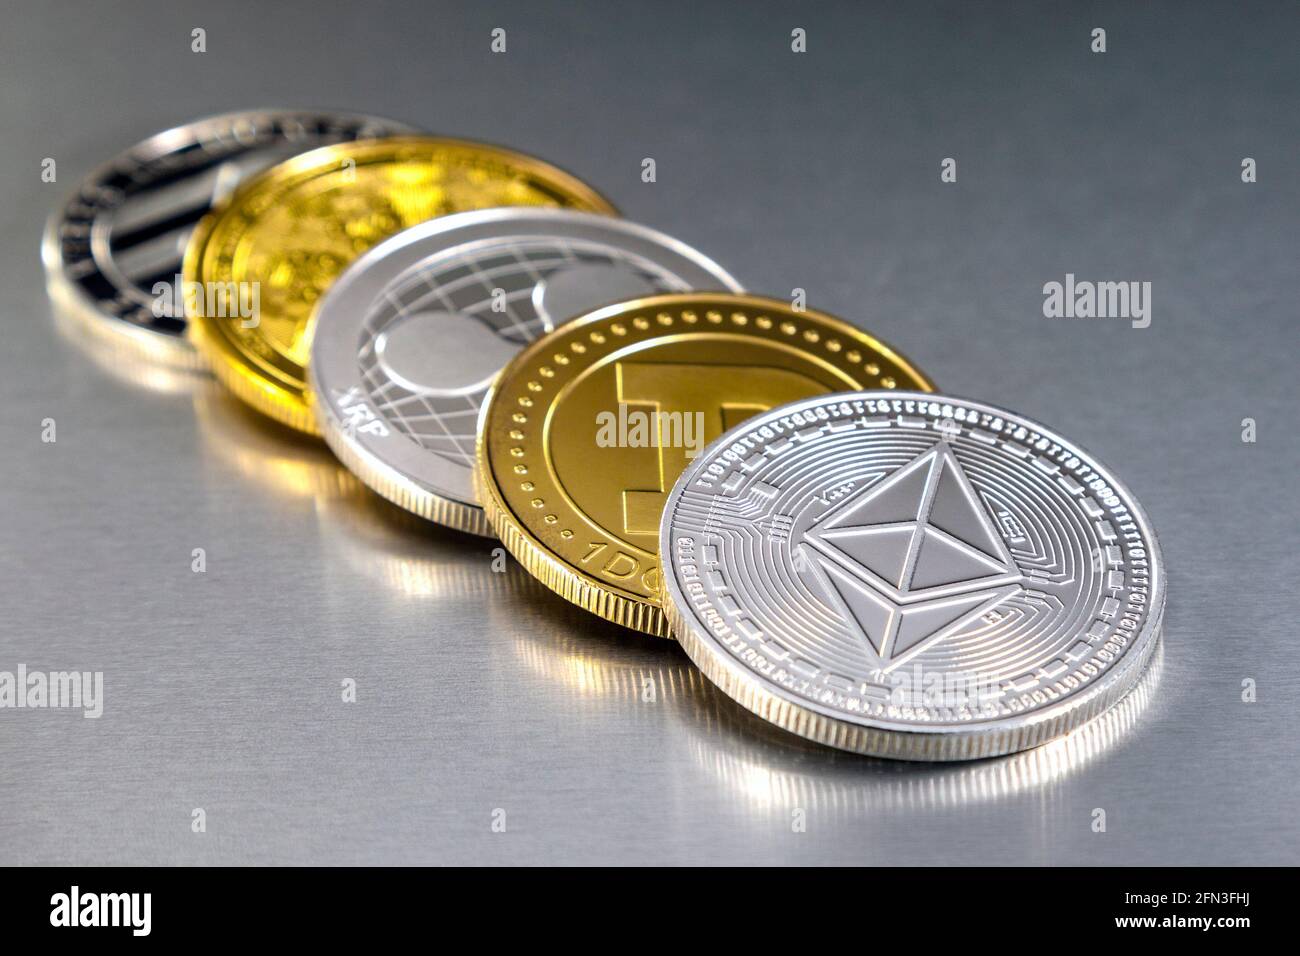 Selection of cryptocurrency token alt coins including ethereum classic, dogecoin, ripple, cardano and litecoin Stock Photo